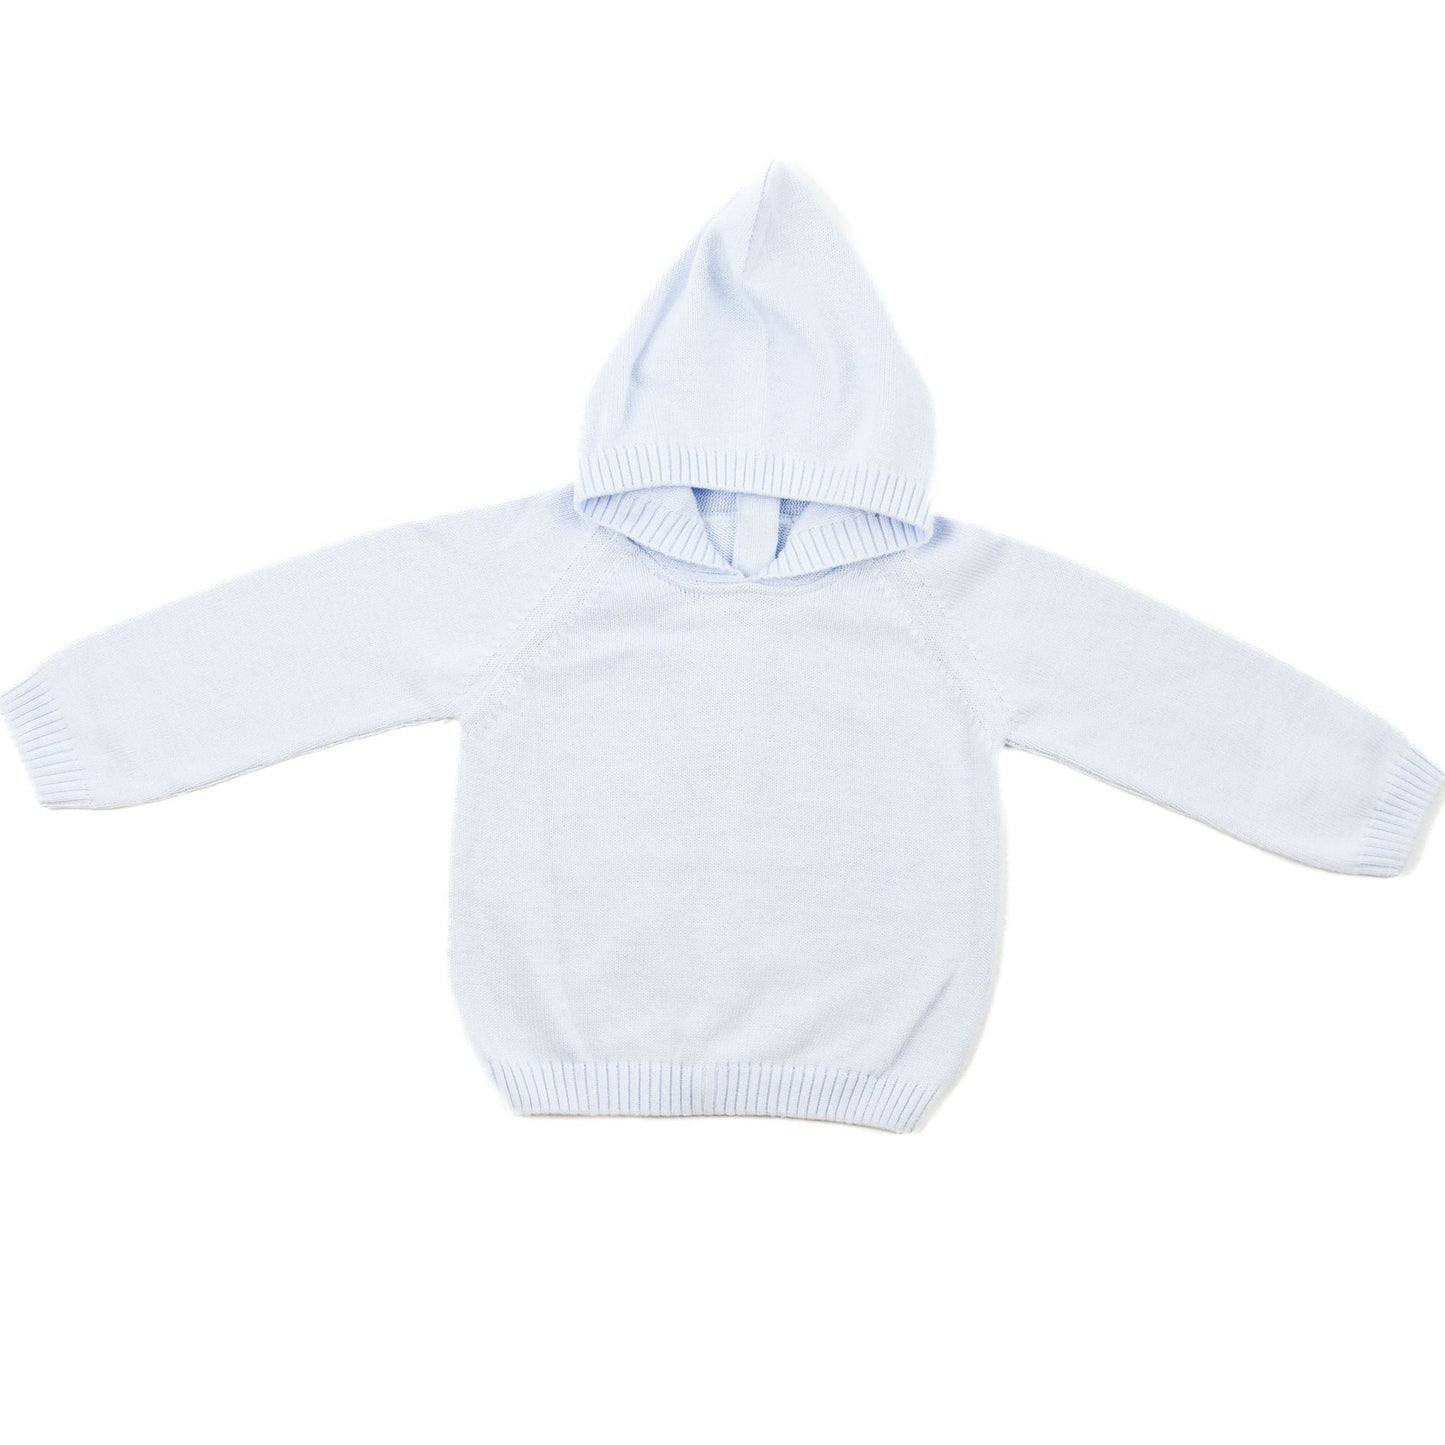 Blue Zip Back Hoodie with Raglan Sleeve made by A Soft Idea.